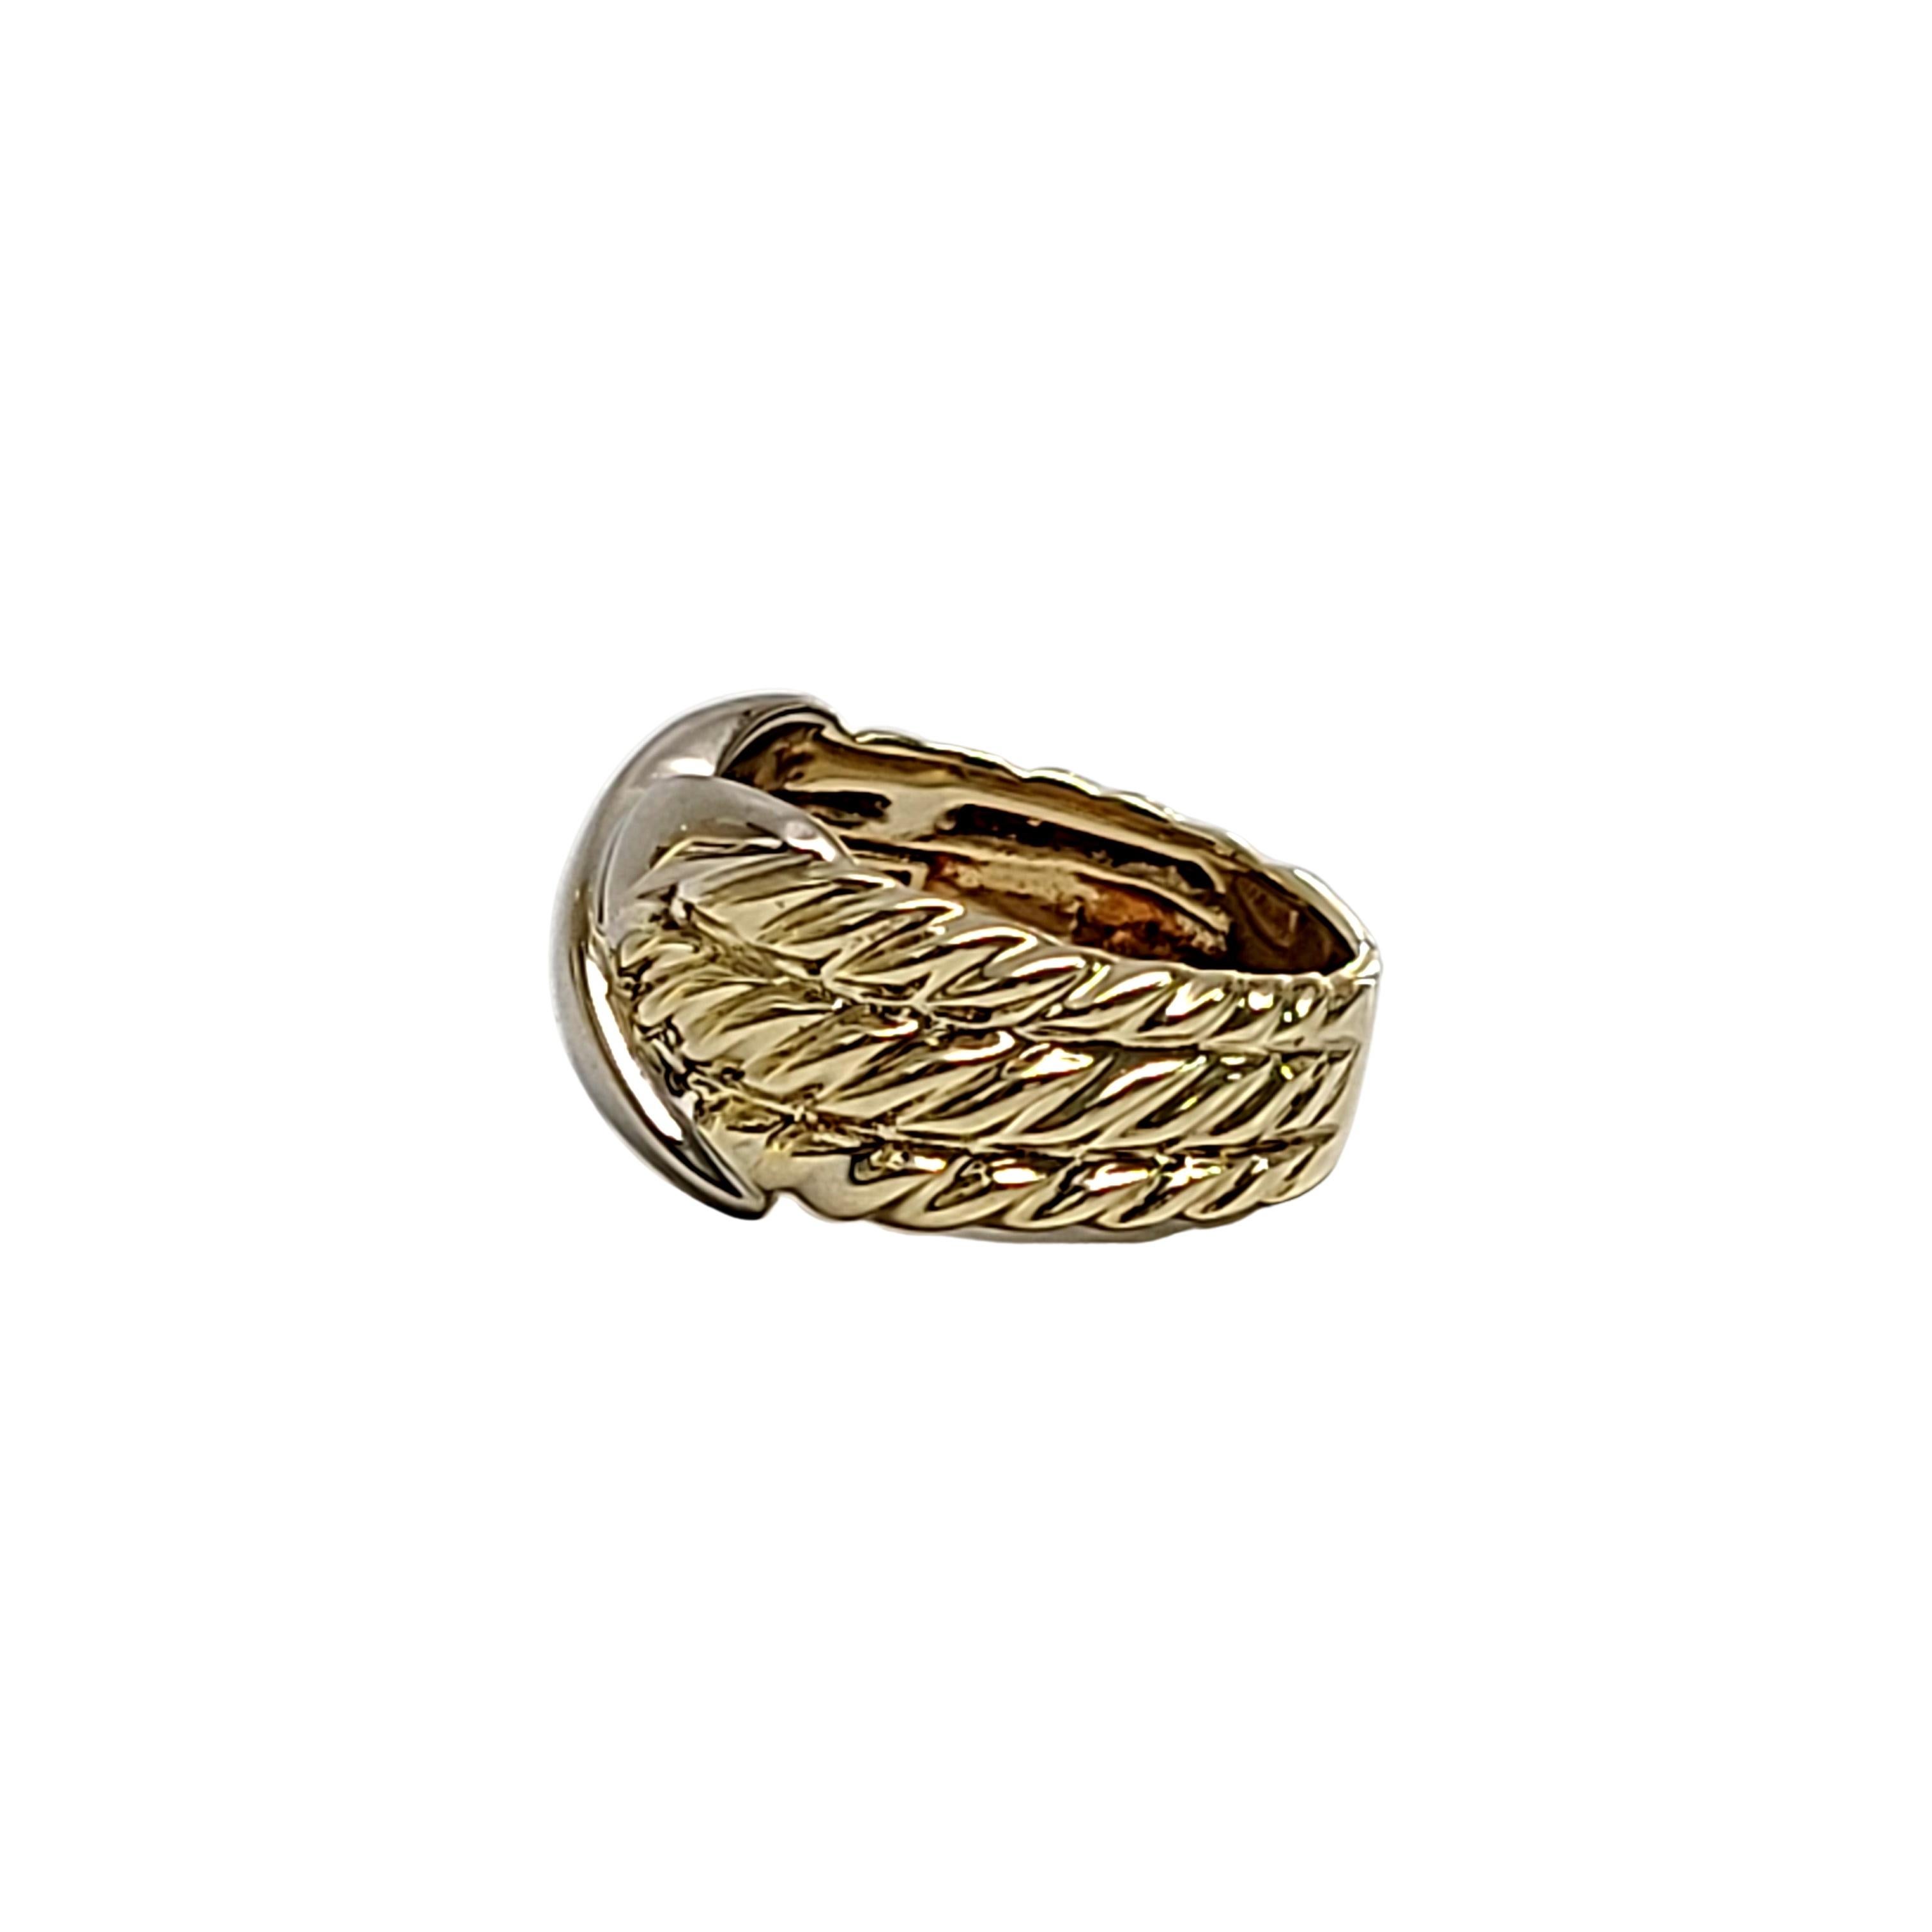 14K yellow and white gold Crossover X ring by David Yurman.

Size 5.75

Features a white gold X at its center with 3 rows of yellow cable bands on each side. Tapers to a smooth back.

Measures 10mm high at front, 5 mm wide at back.

Weighs 7g,